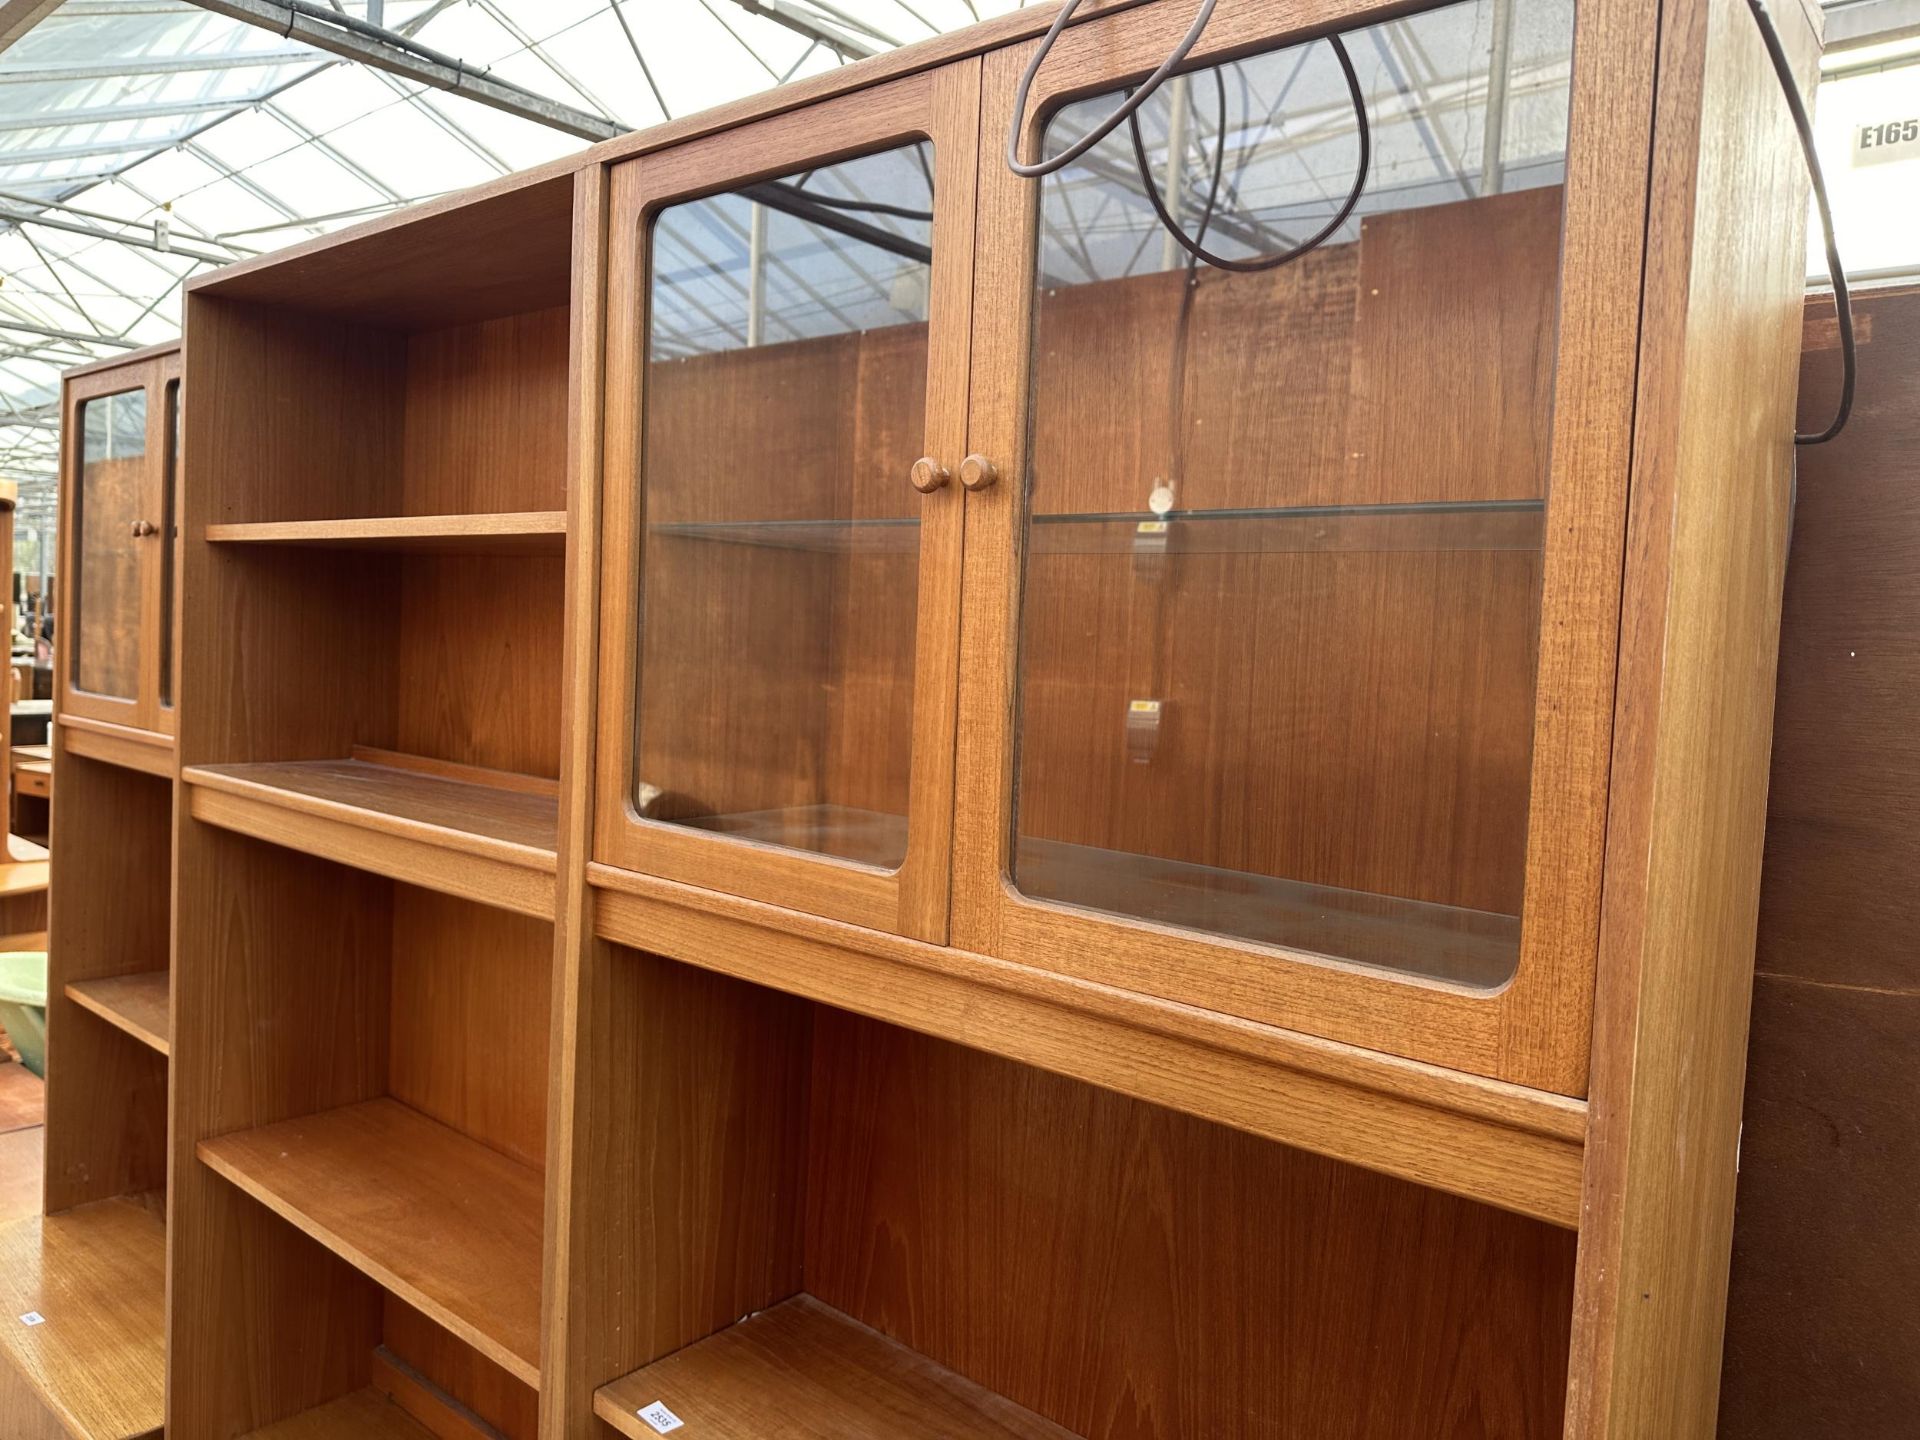 A G PLAN RETRO TEAK UNIT WITH TWO GLAZED UPPER DOORS AND DRAWERS TO BASE 64" WIDE - Bild 2 aus 6